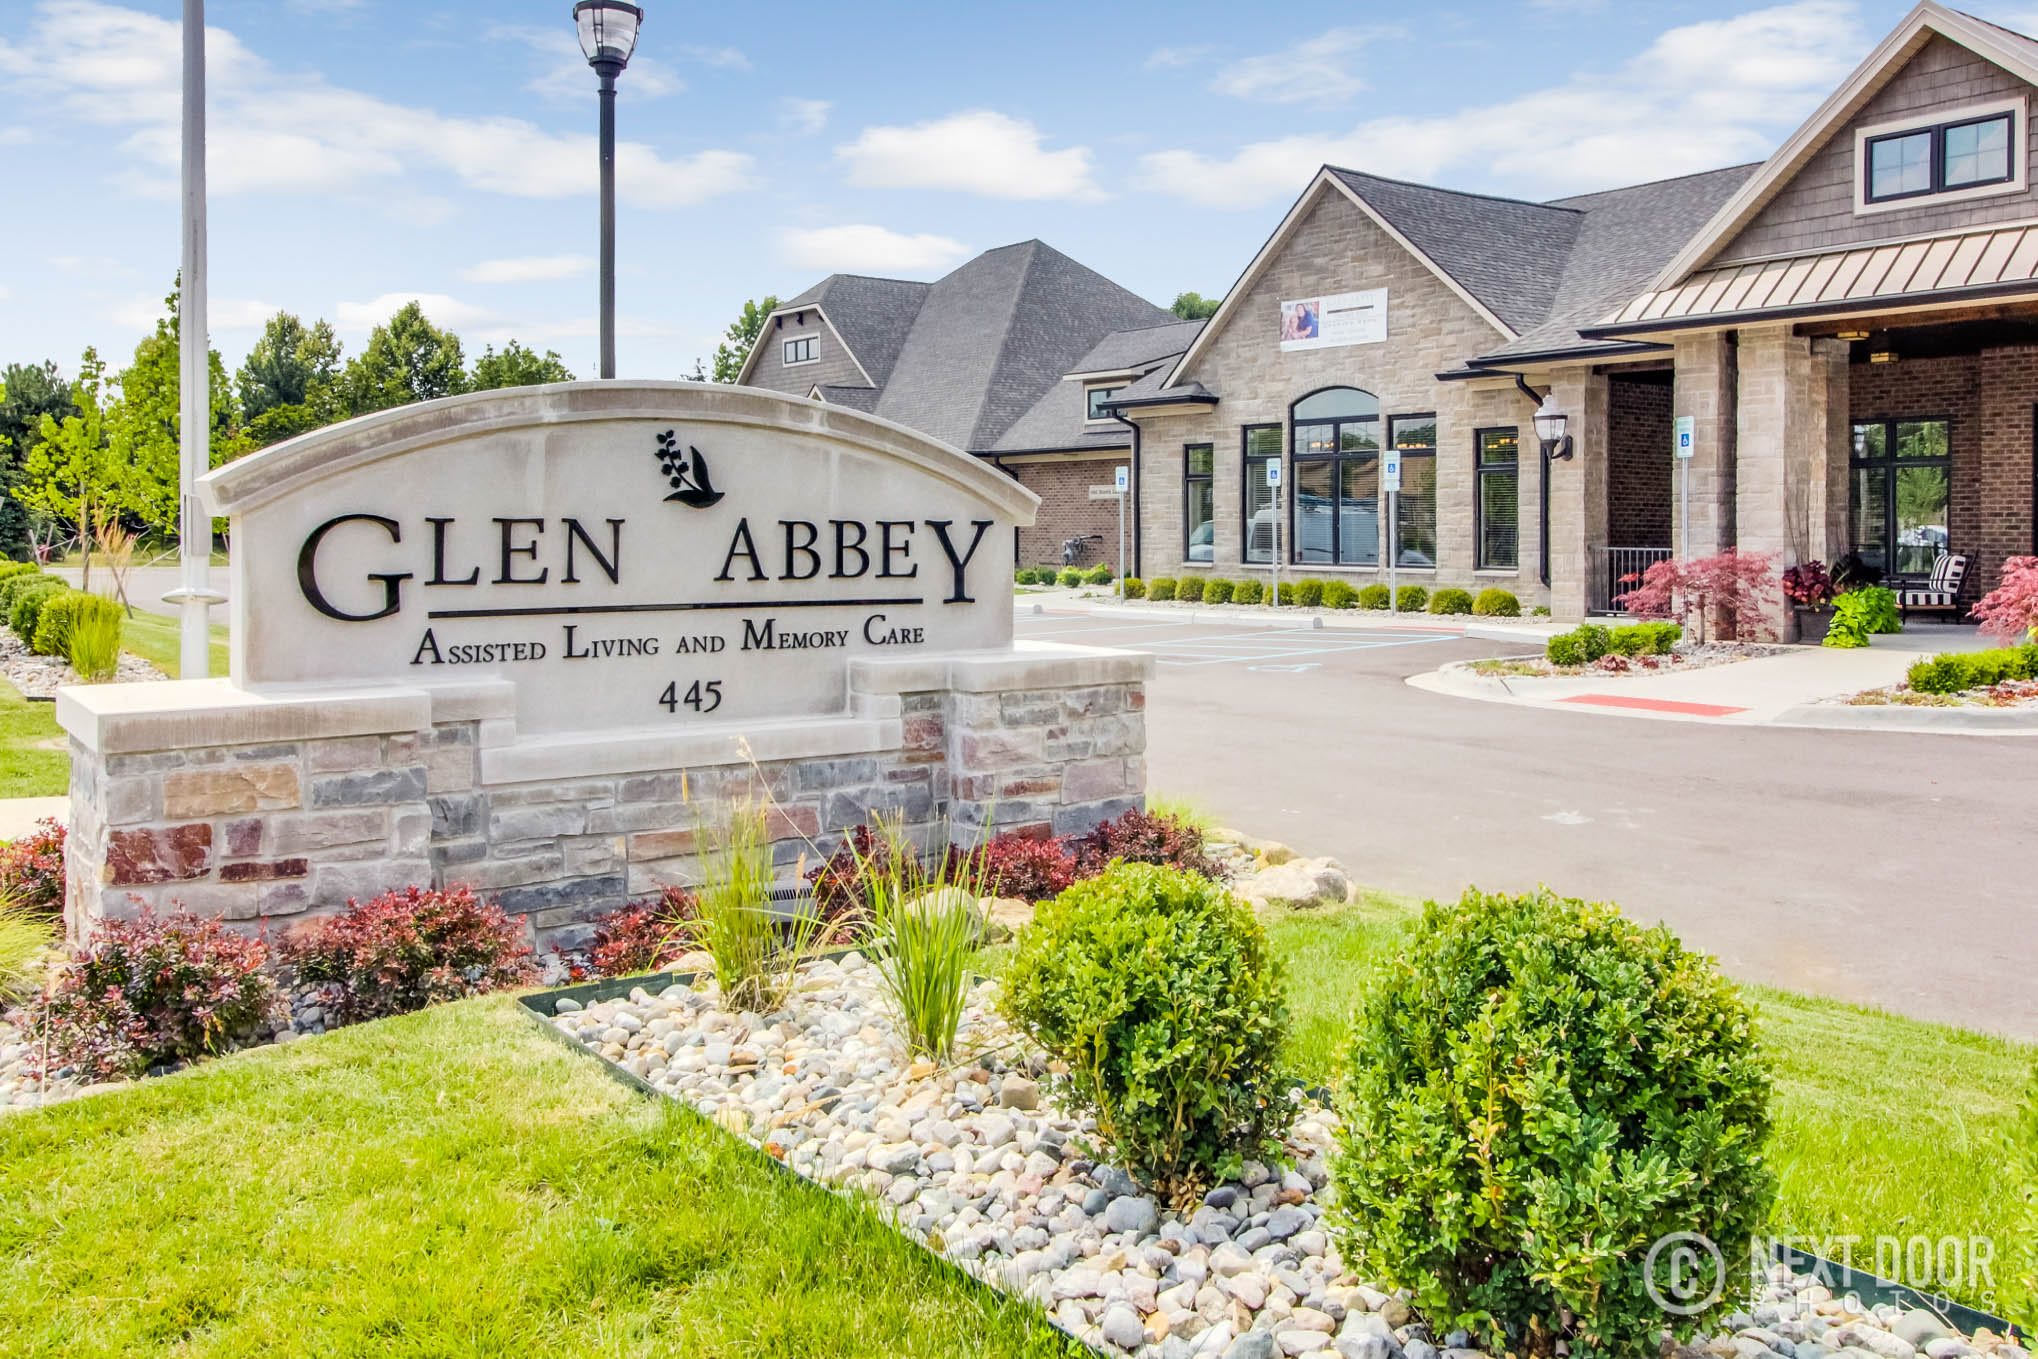 Glen Abbey Assisted Living and Memory Care Entrance